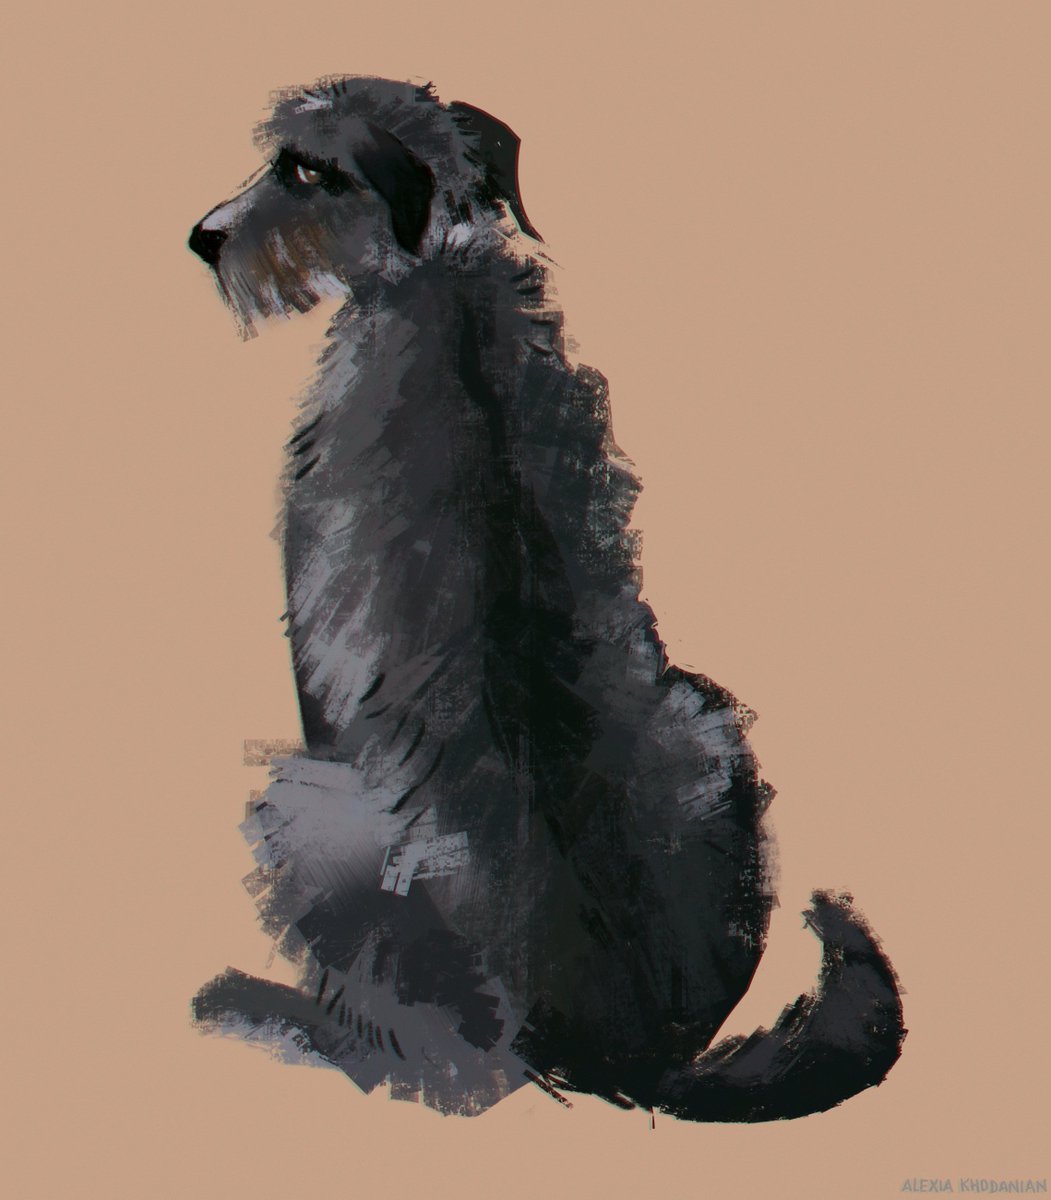  #doggust day 26: Irish Wolfhound! sir you are very large